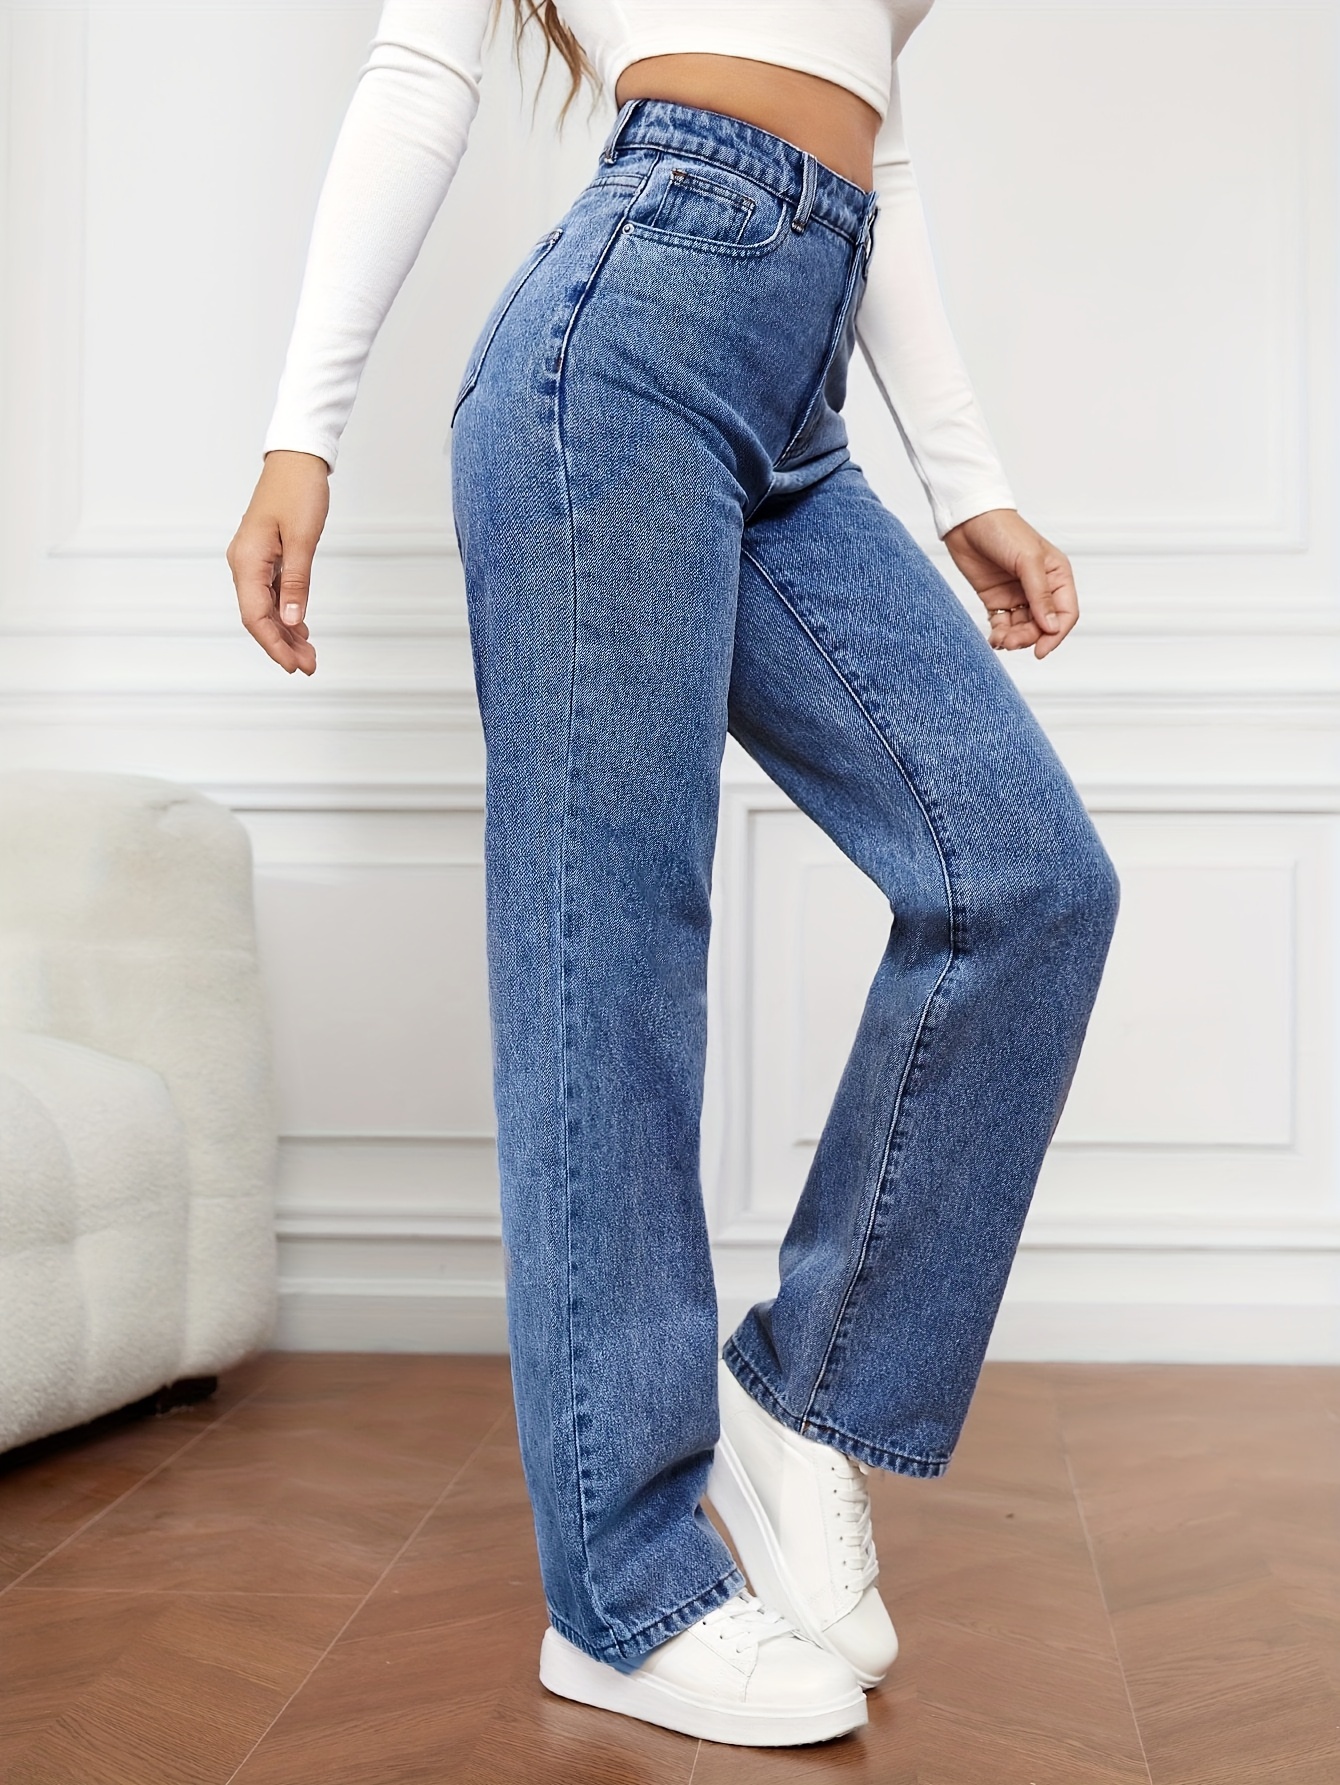 womens high waist washed jeans versatile straight leg pants casual style denim long trousers for daily wear details 3